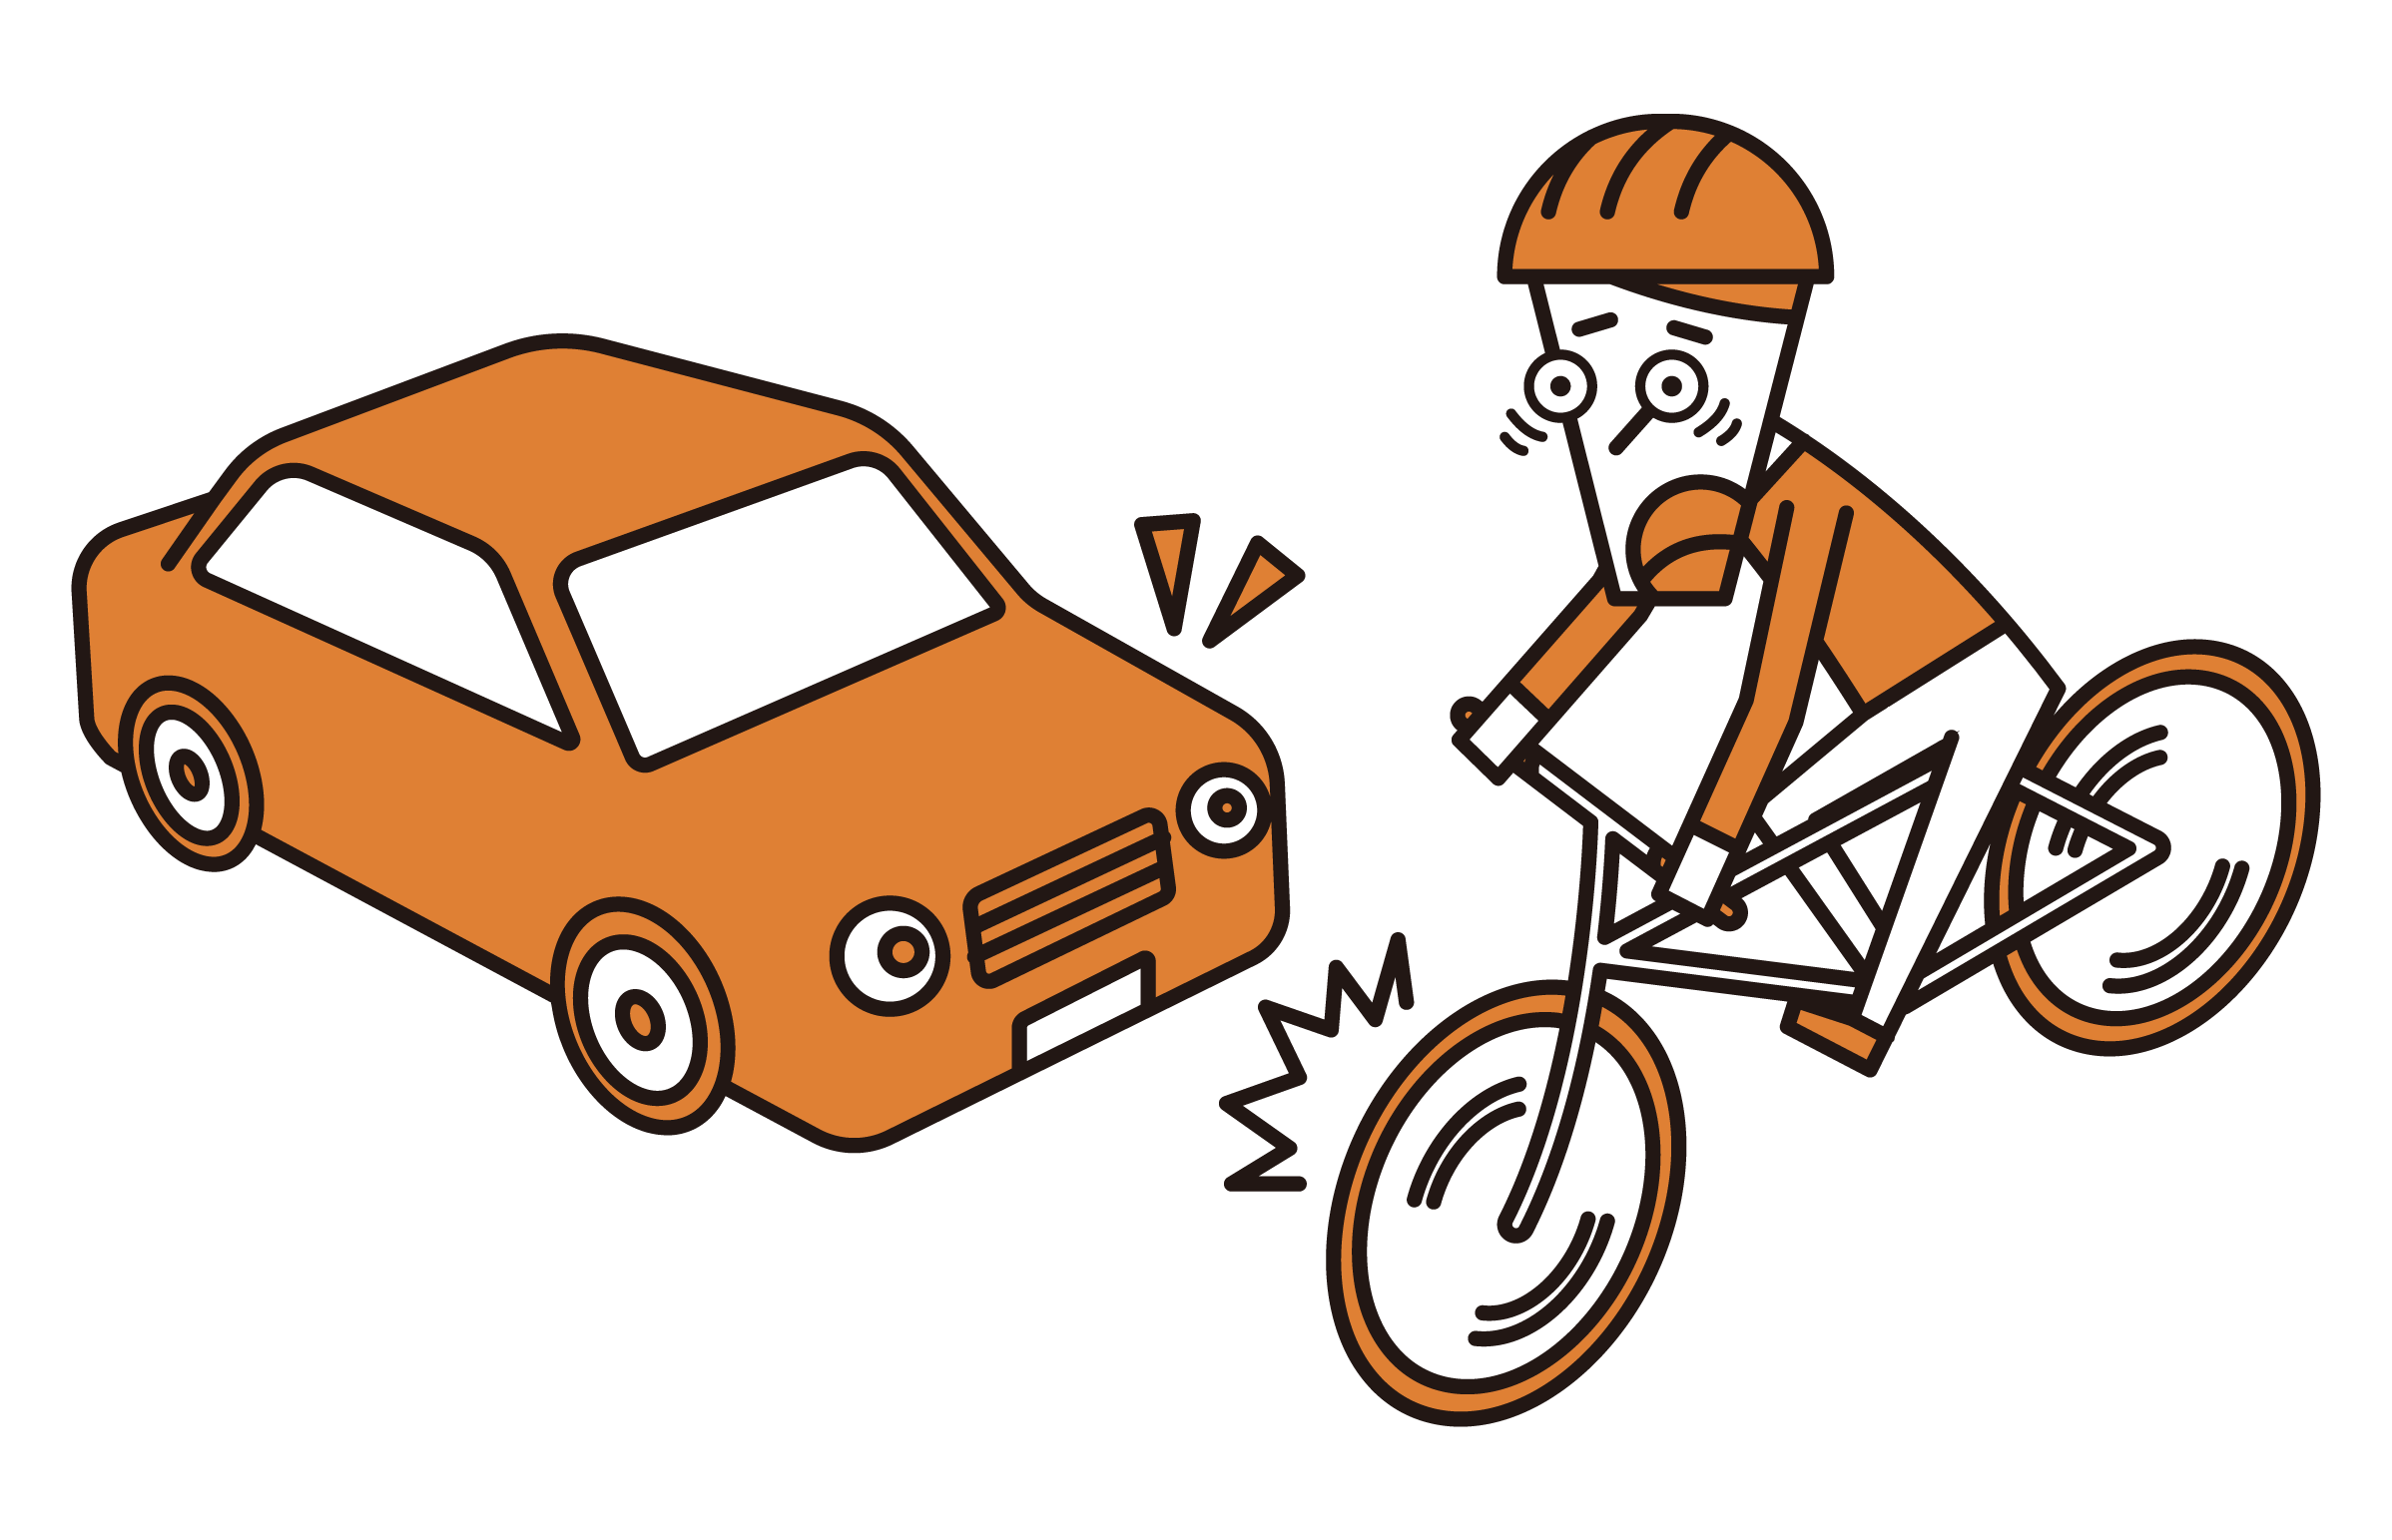 Illustration of a cyclist (male) who is about to collide with a car